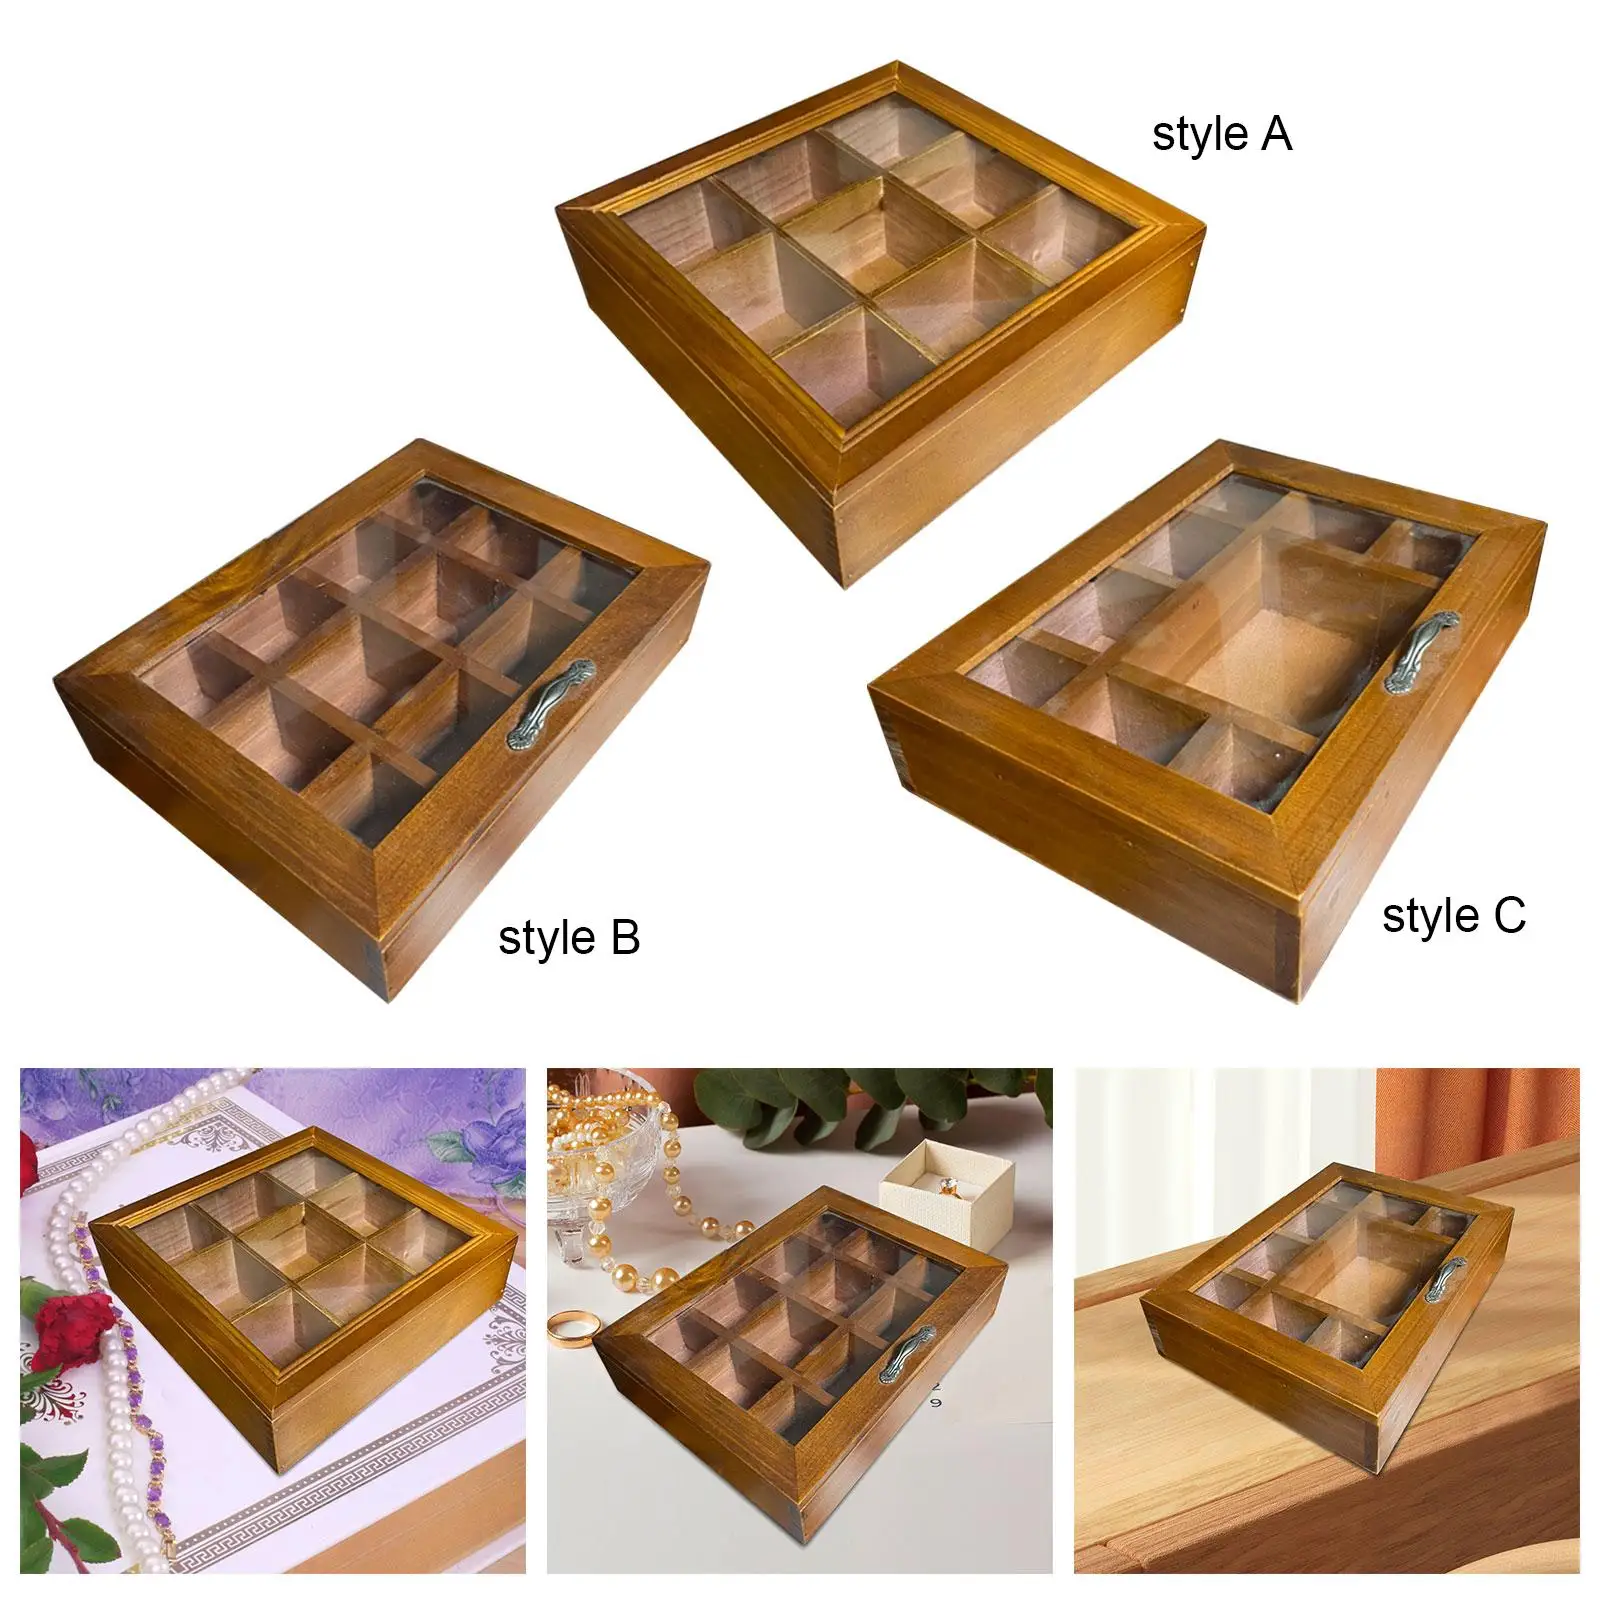 Wooden Storage Cabinet Model Car Display Box Large Capacity Tea Chests for Bathroom Pantry Kitchen Cabinets Countertops Doll